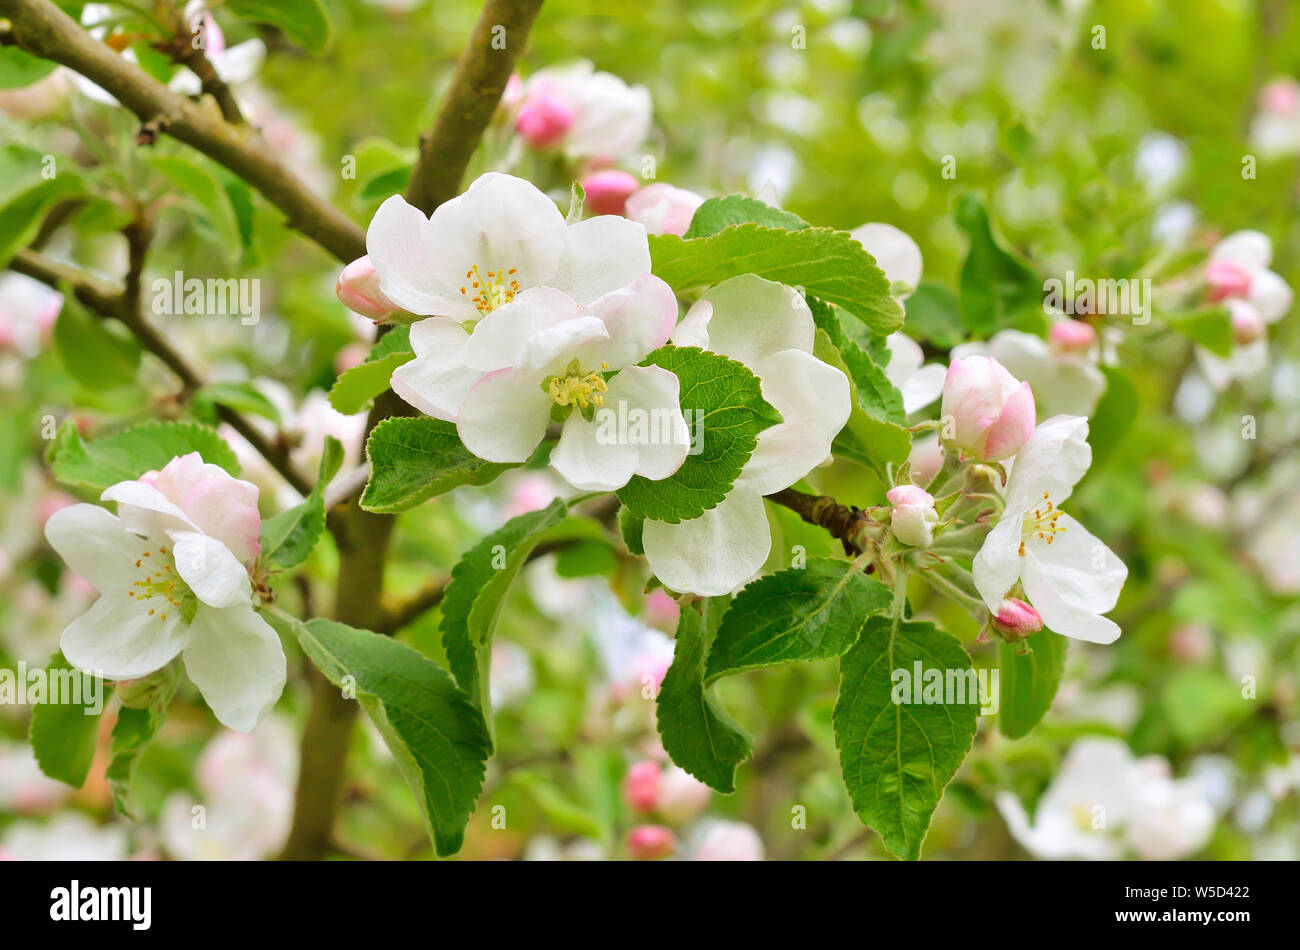 Blossoming of apple trees in the garden, focus on flower in front Stock Photo